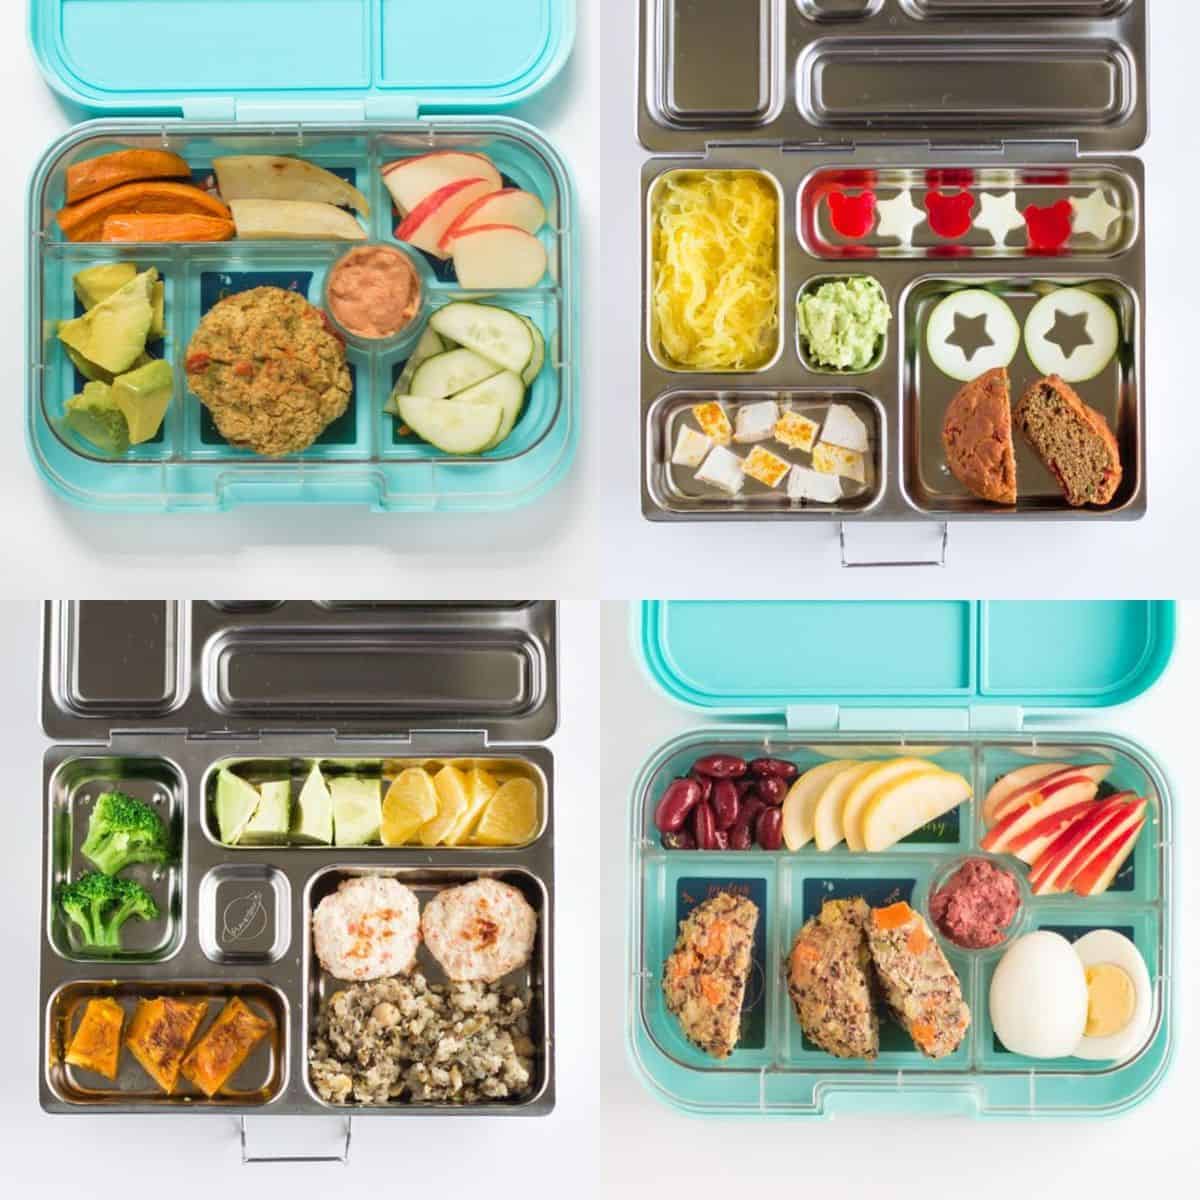 four lunchboxes with baked goods as the main component